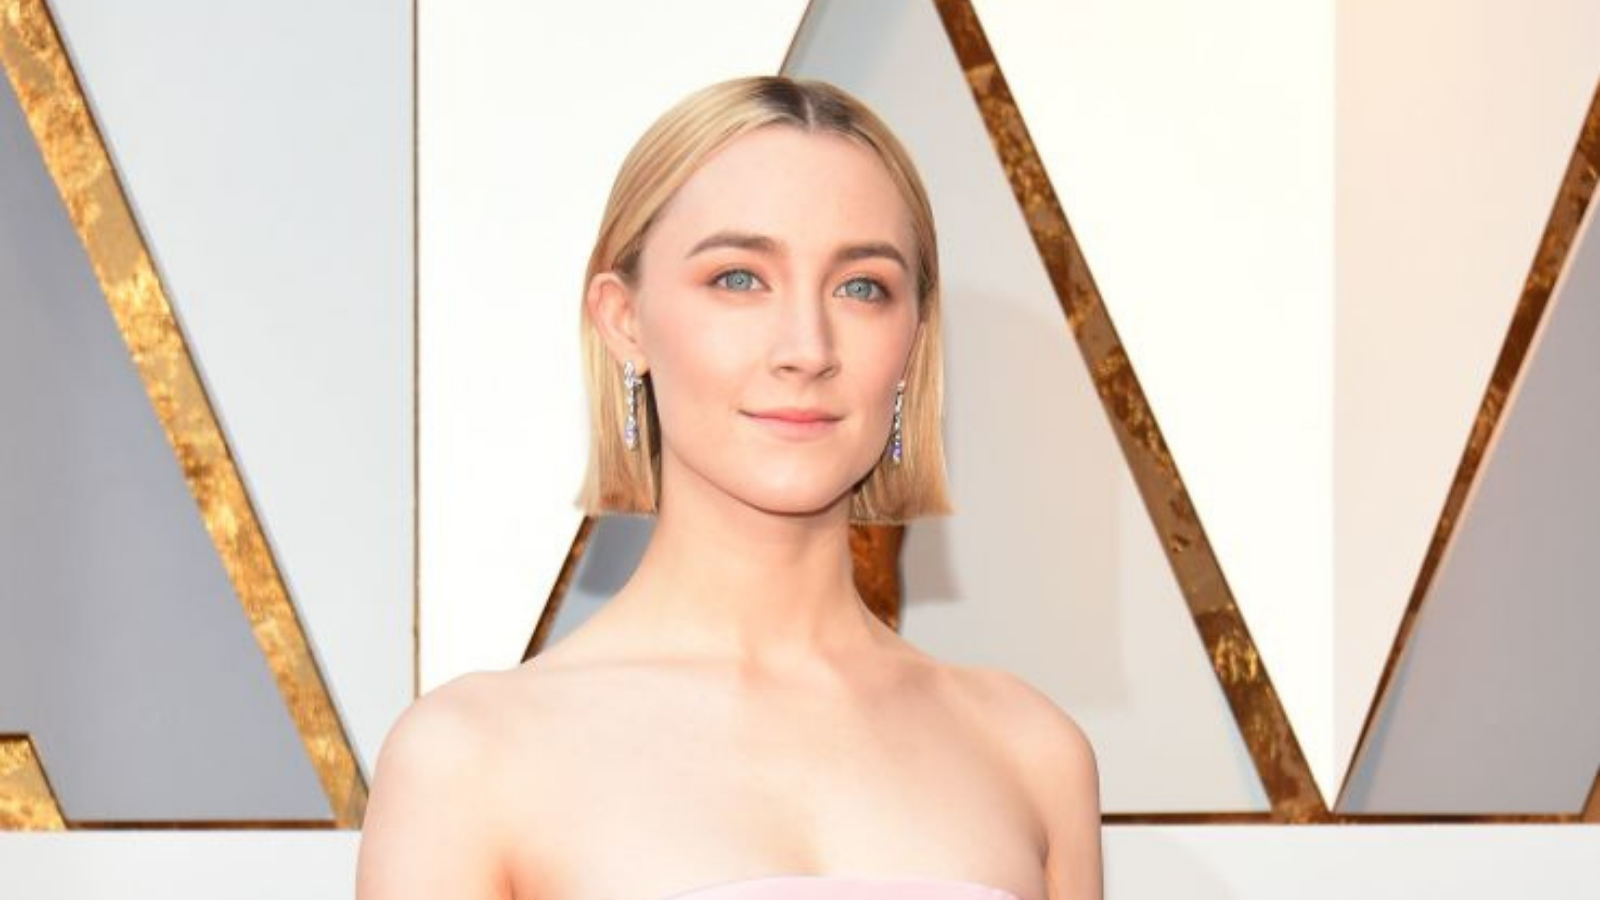 A woman with short blonde hair - the actress Saiorse Ronan - in a pink strapless dress at a red carpet event (The Oscars).